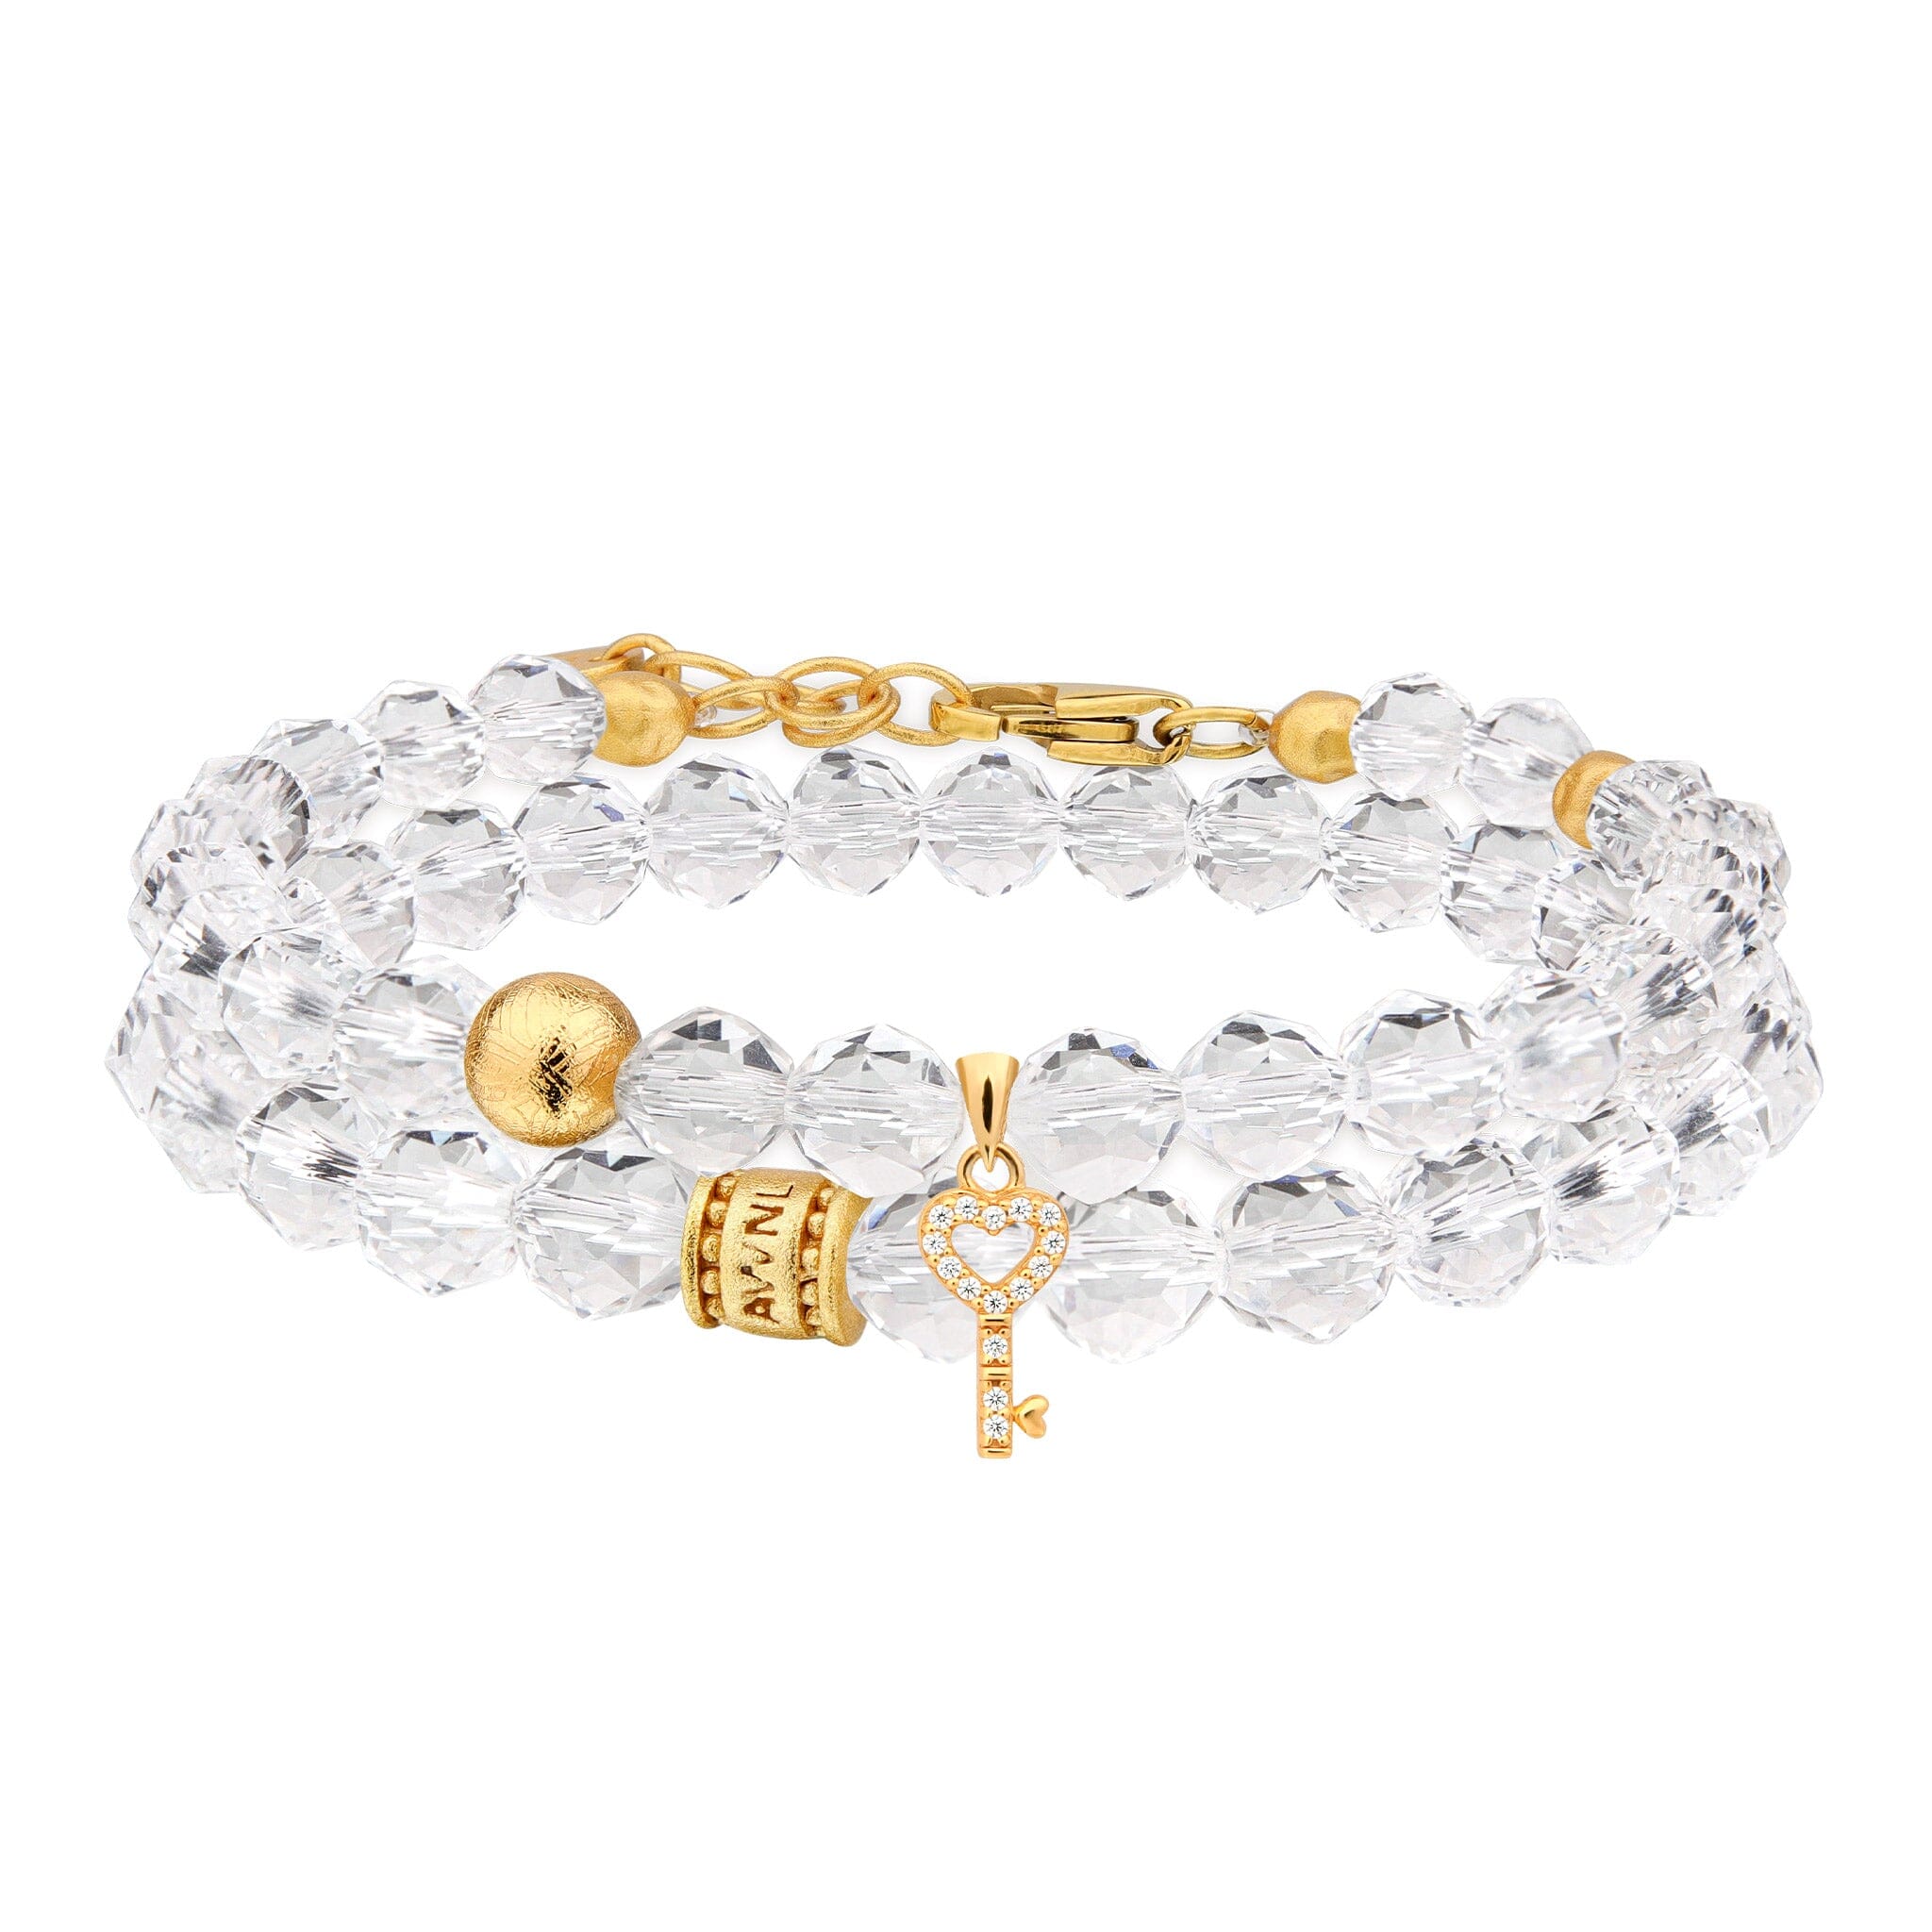 Women's Stacked Bracelet with Meteorite and Clear Quartz/Citrine Bracelets WAA FASHION GROUP 